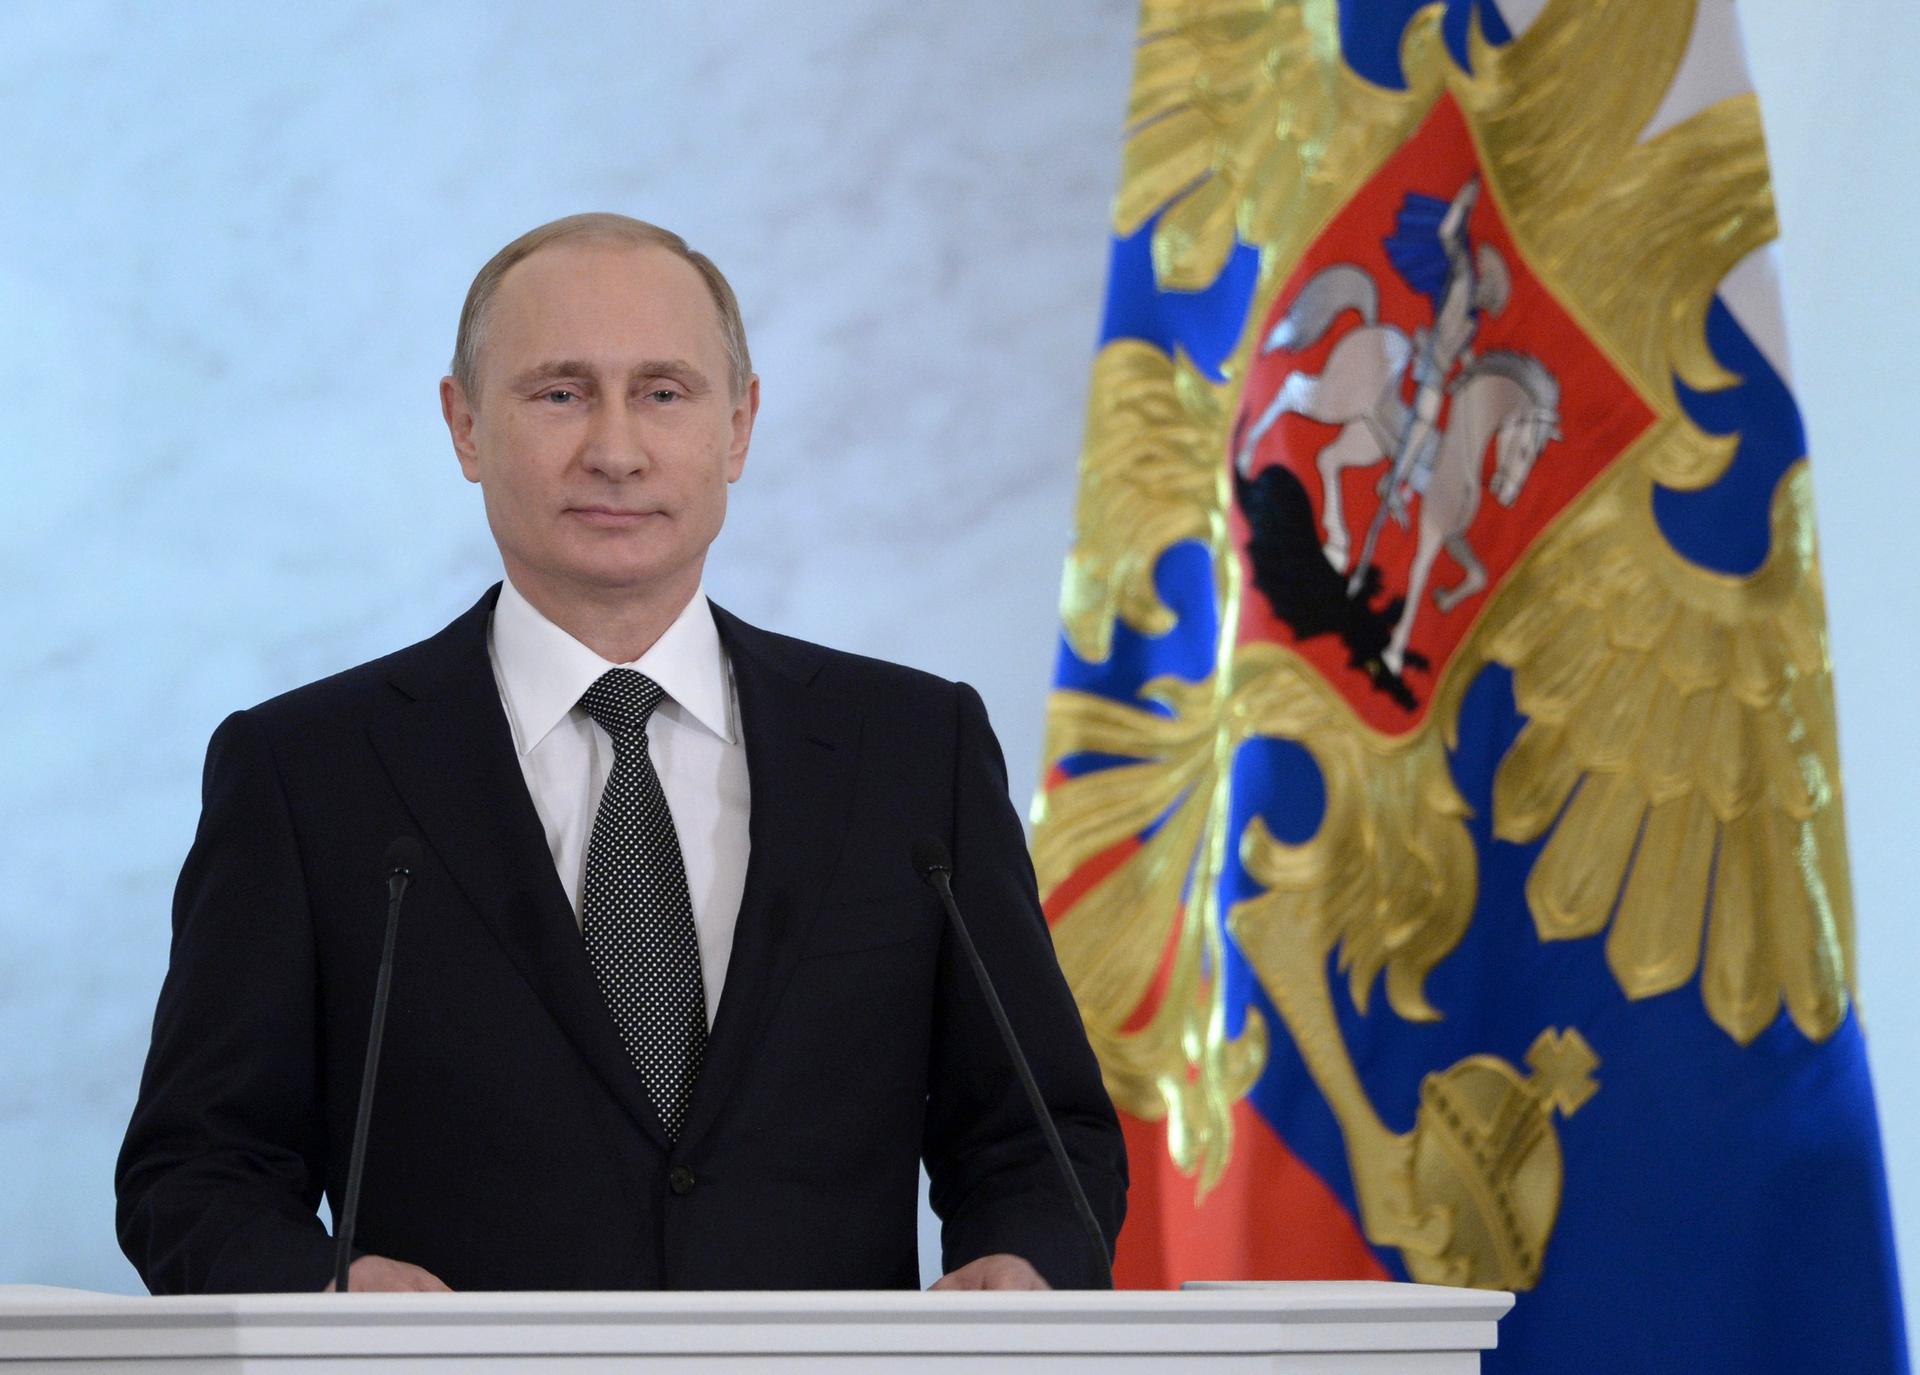 Russia's President Vladimir Putin giving his State of the Nation speech.